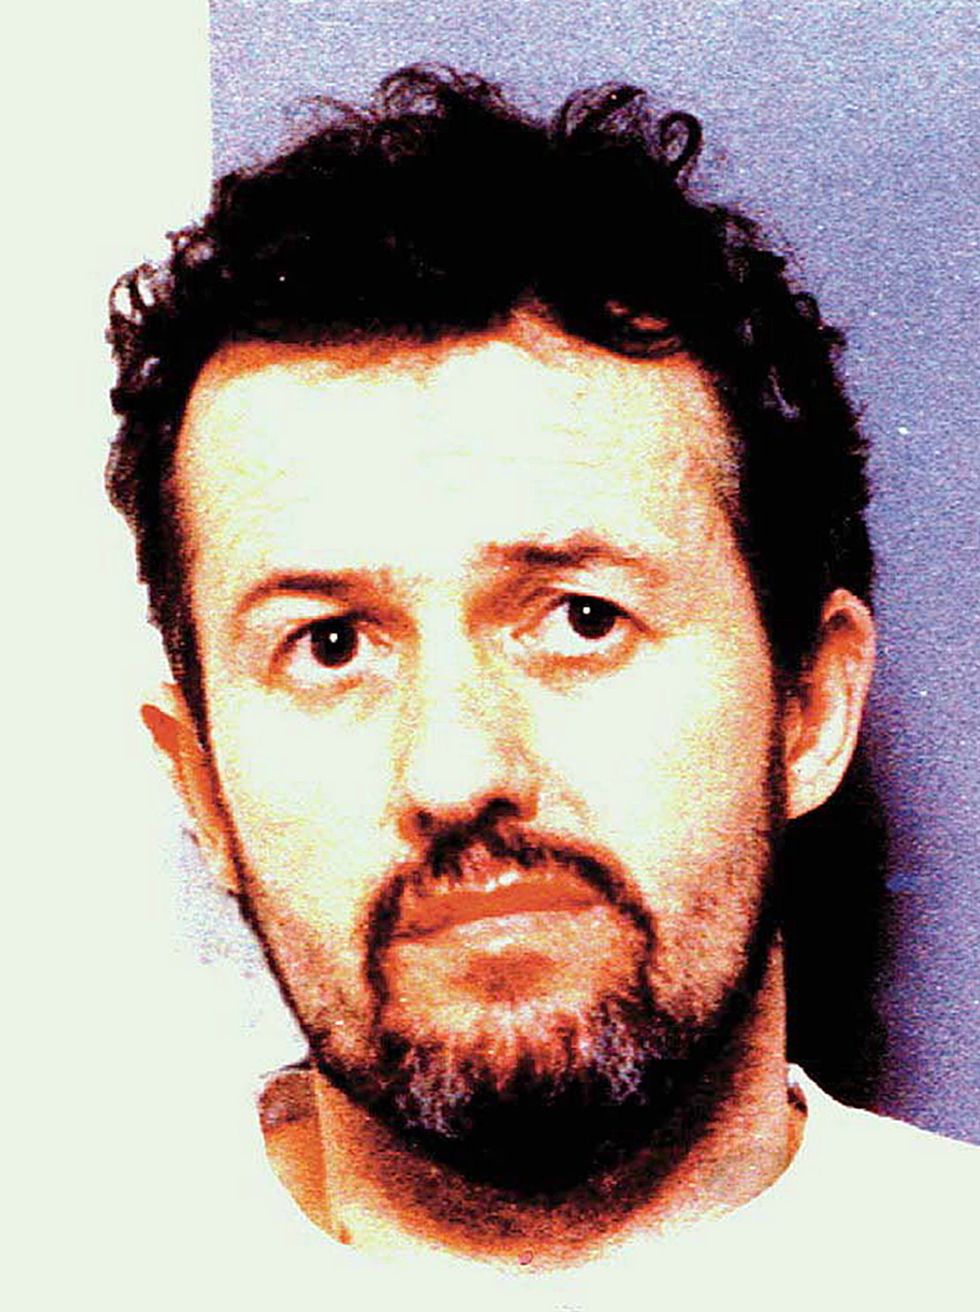 Ex-football coach and convicted paedophile Barry Bennell.